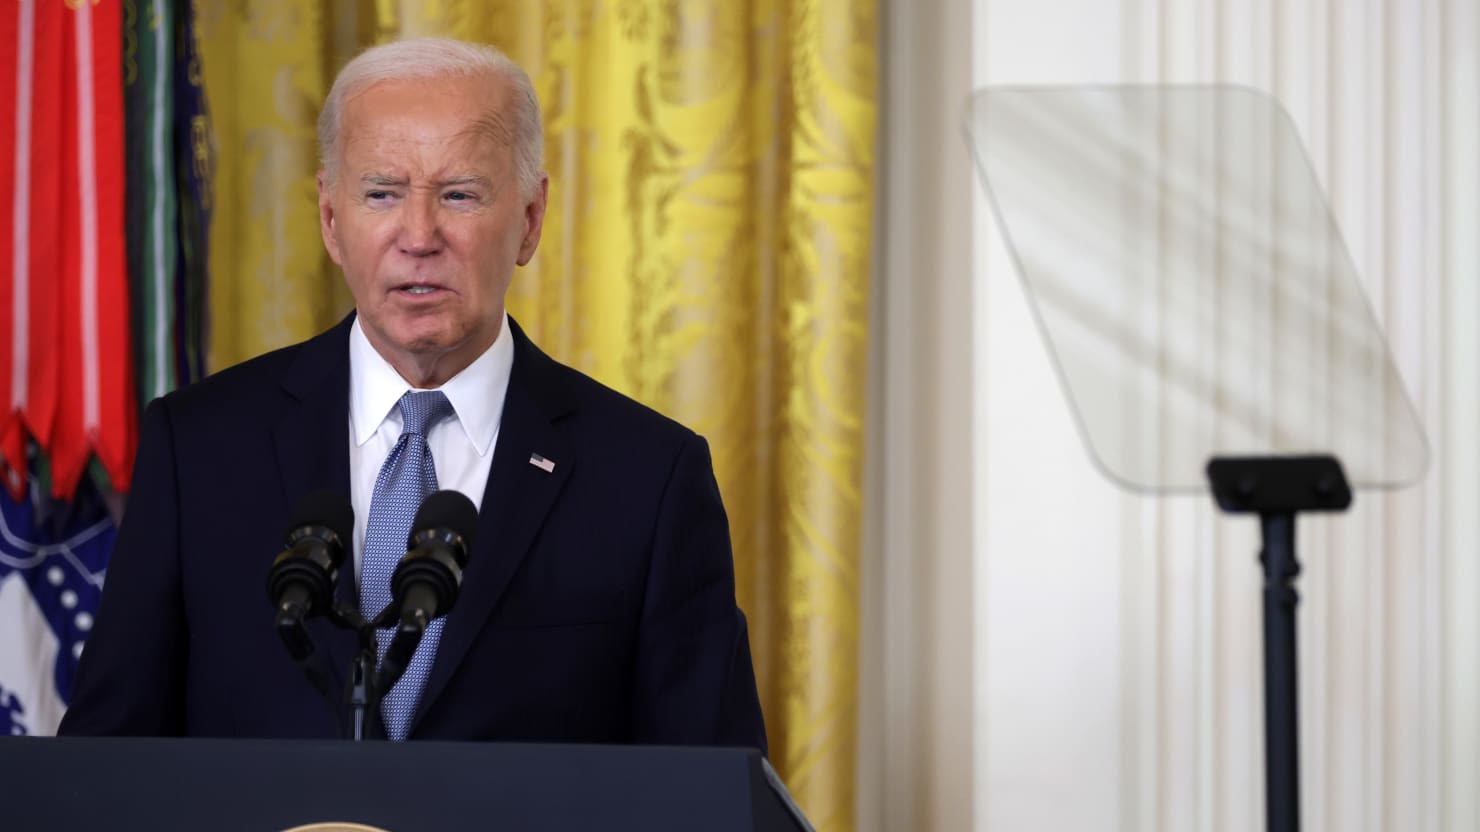 Biden Says He Had a Medical Checkup After Disaster Debate: Report